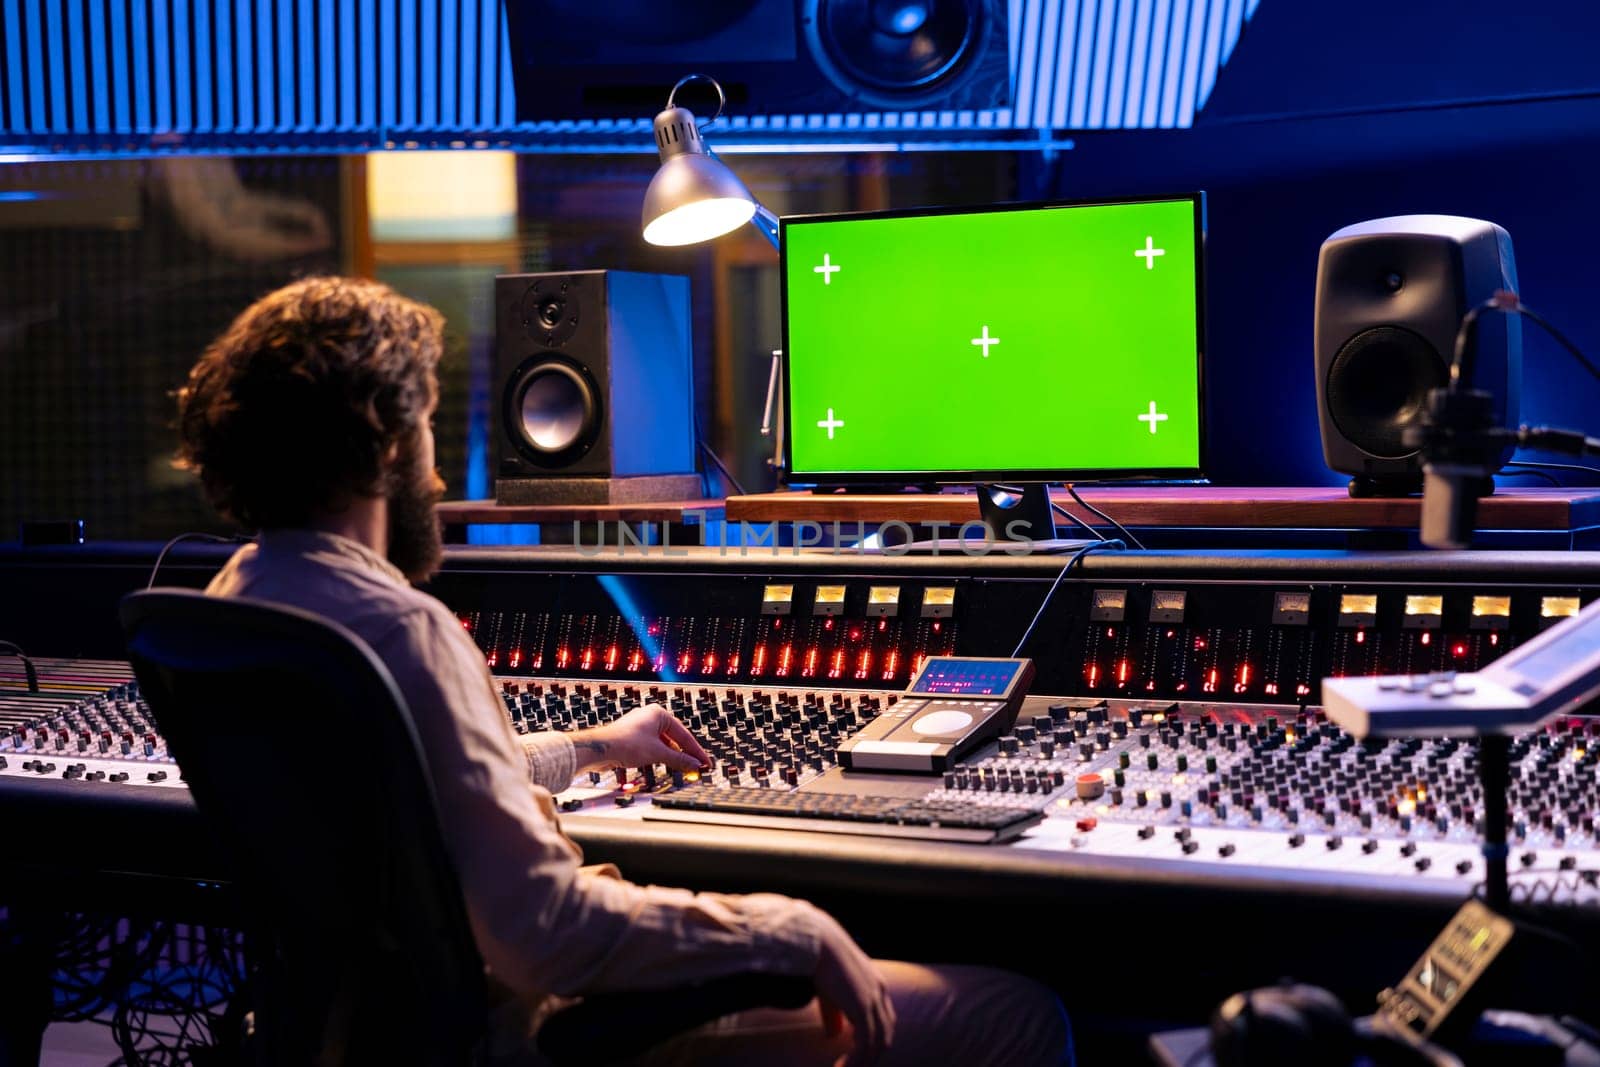 Sound designer working on mixing and mastering tracks with mockup display, using control panel board in professional studio. Skilled producer looks at greenscreen, editing music.